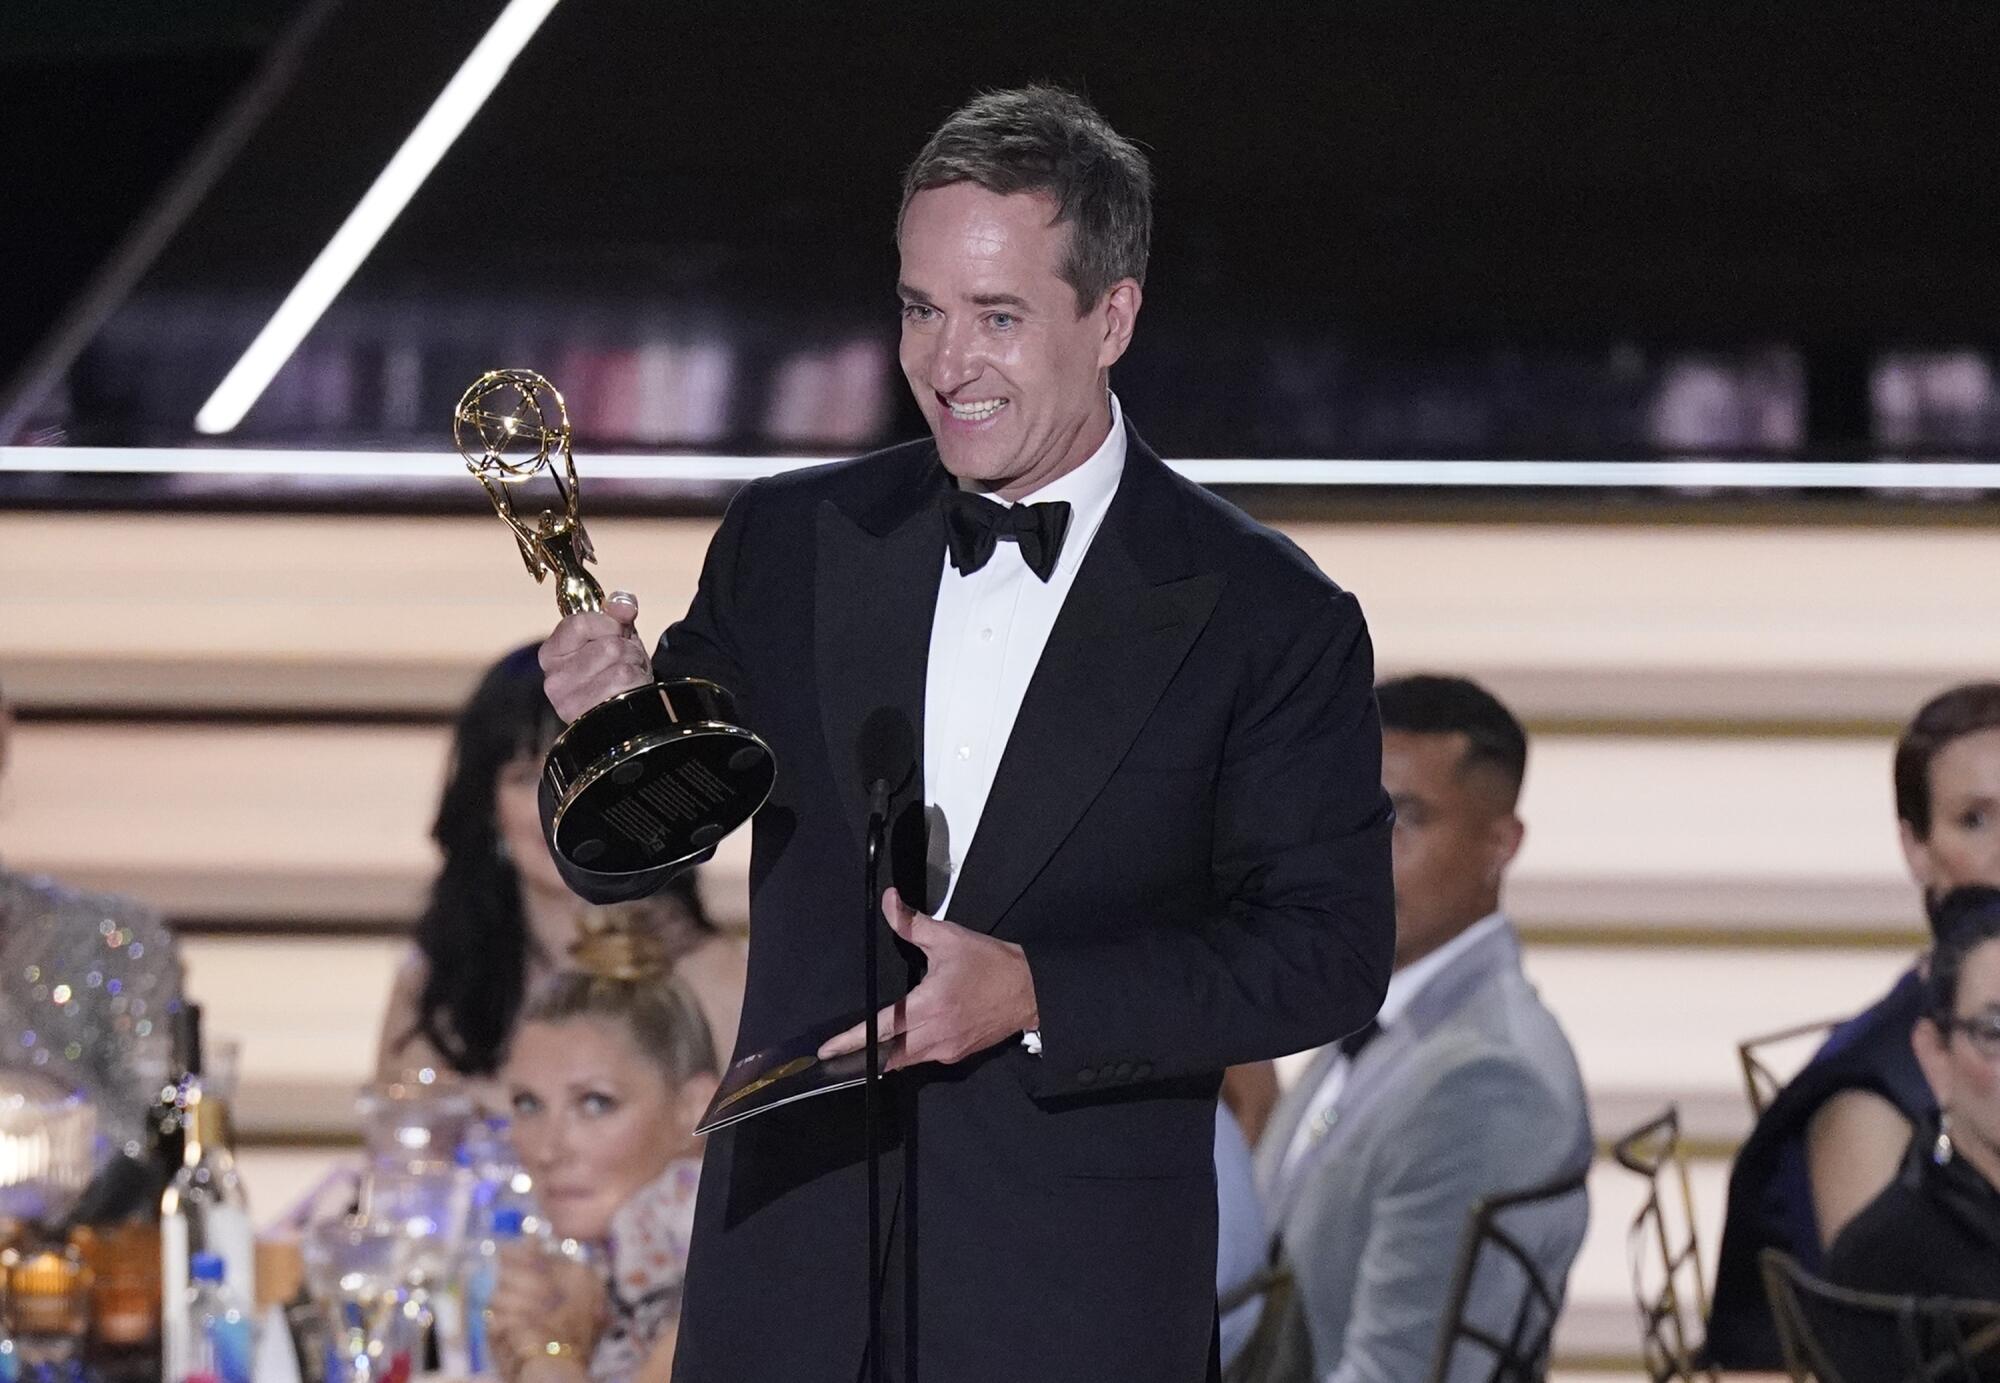 A man smiles as he accepts the Emmy behind a microphone